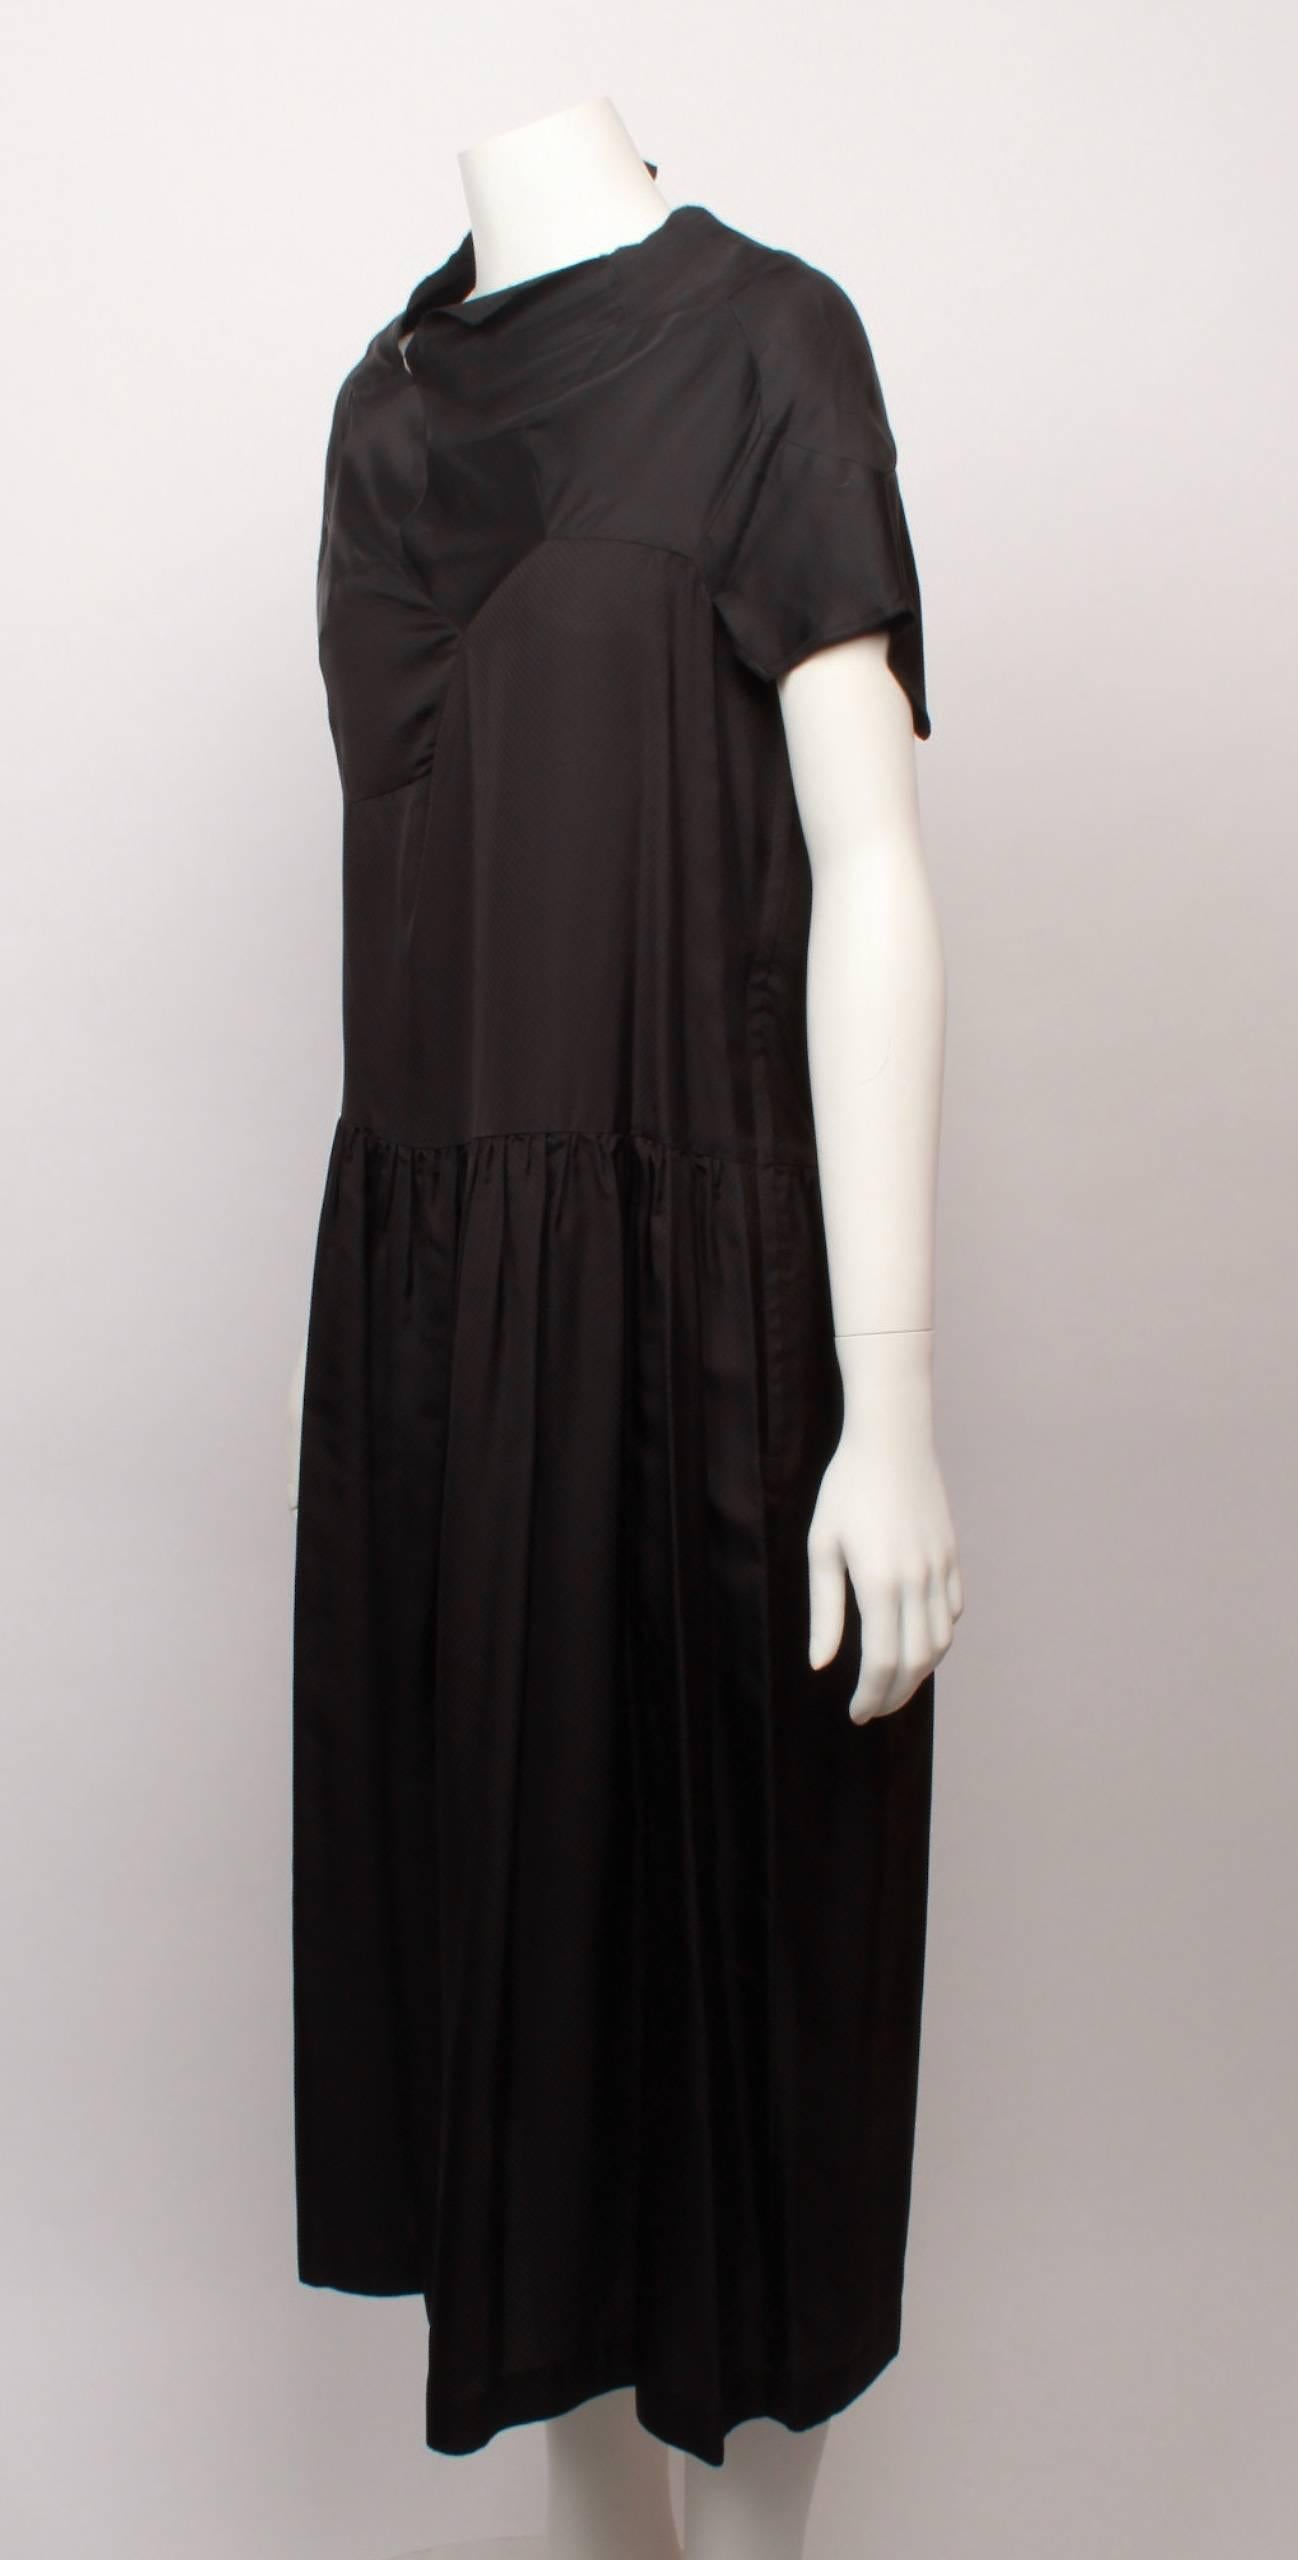 Comme des Garcons hi tech black synthetic dress with geometric panelled bodice and asymmetric neckline and capped sleeve. Dress features dropped waist and gathered skirt from hip. 
Label is dated AD2008. 
